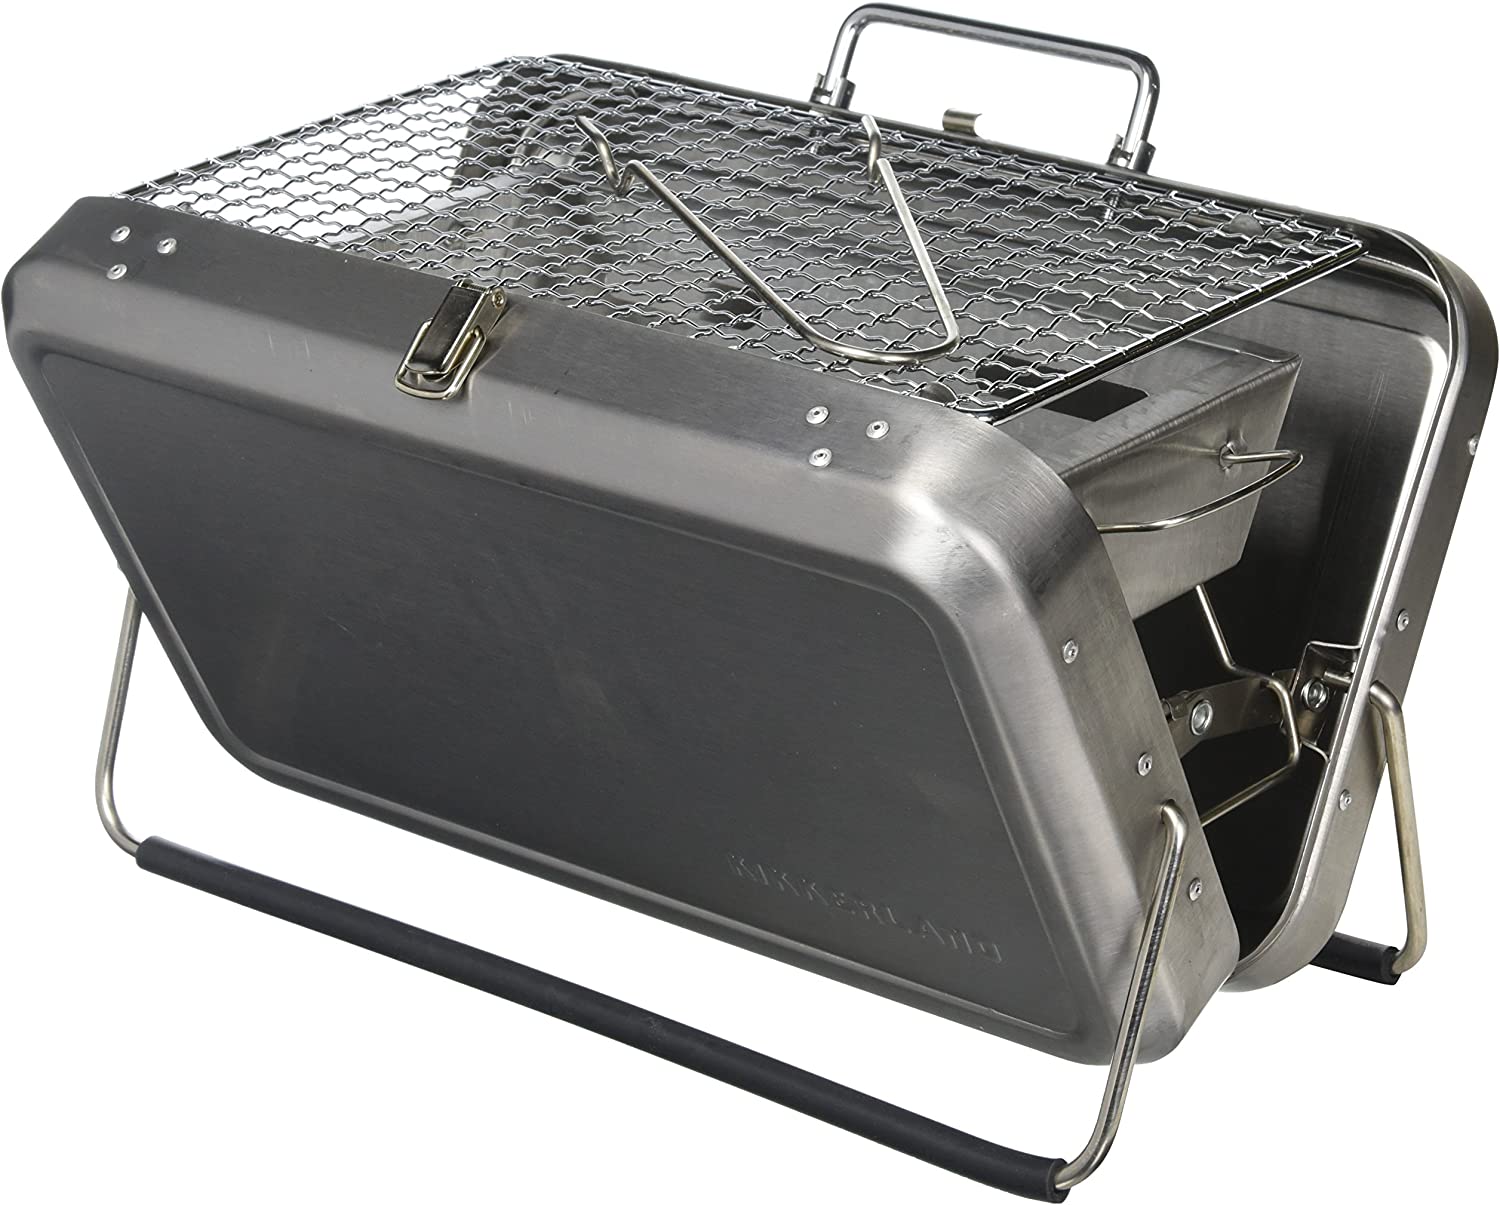 BRIEFCASE BARBECUE - PORTABLE CHARCOAL GRILL